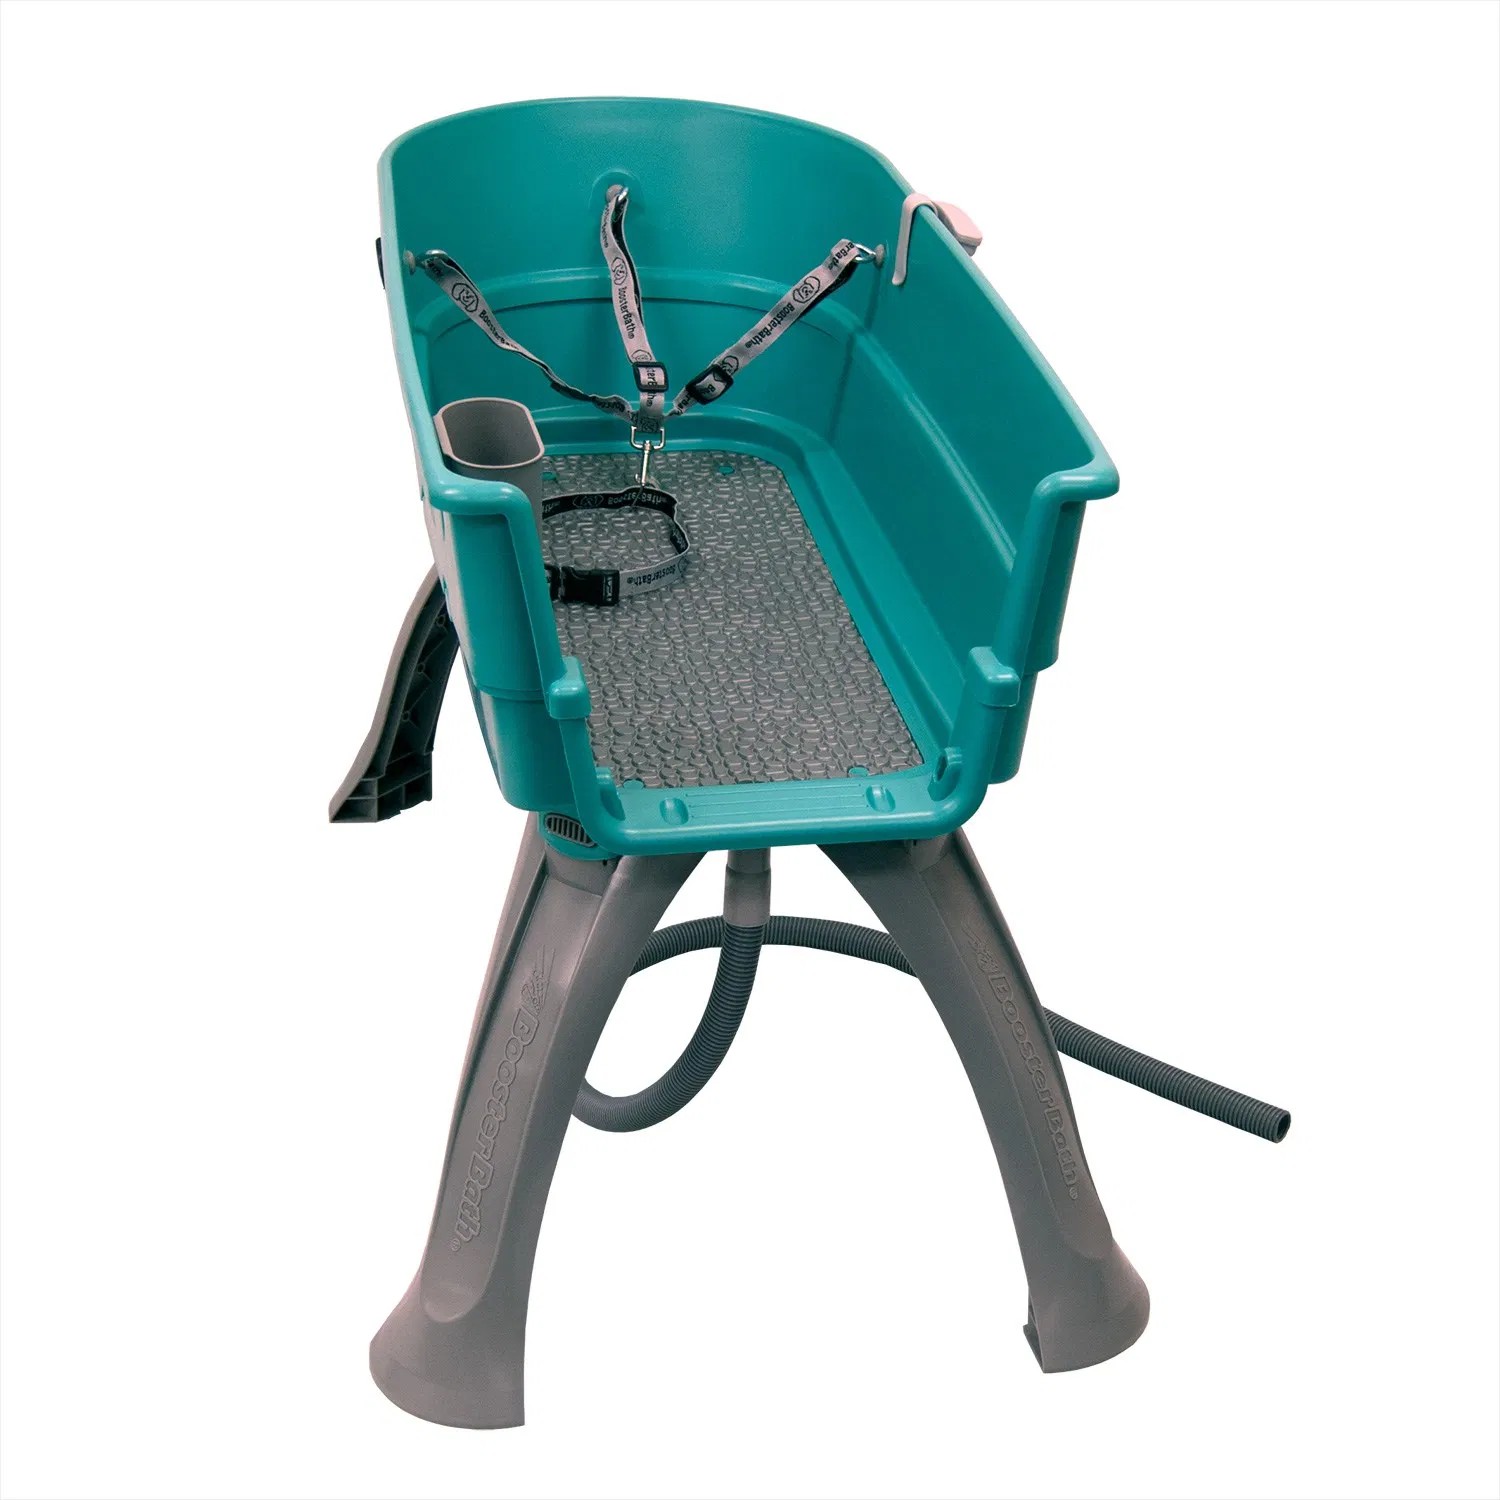 Large Booster Bath Elevated Dog Bath & Grooming Center - (Teal)